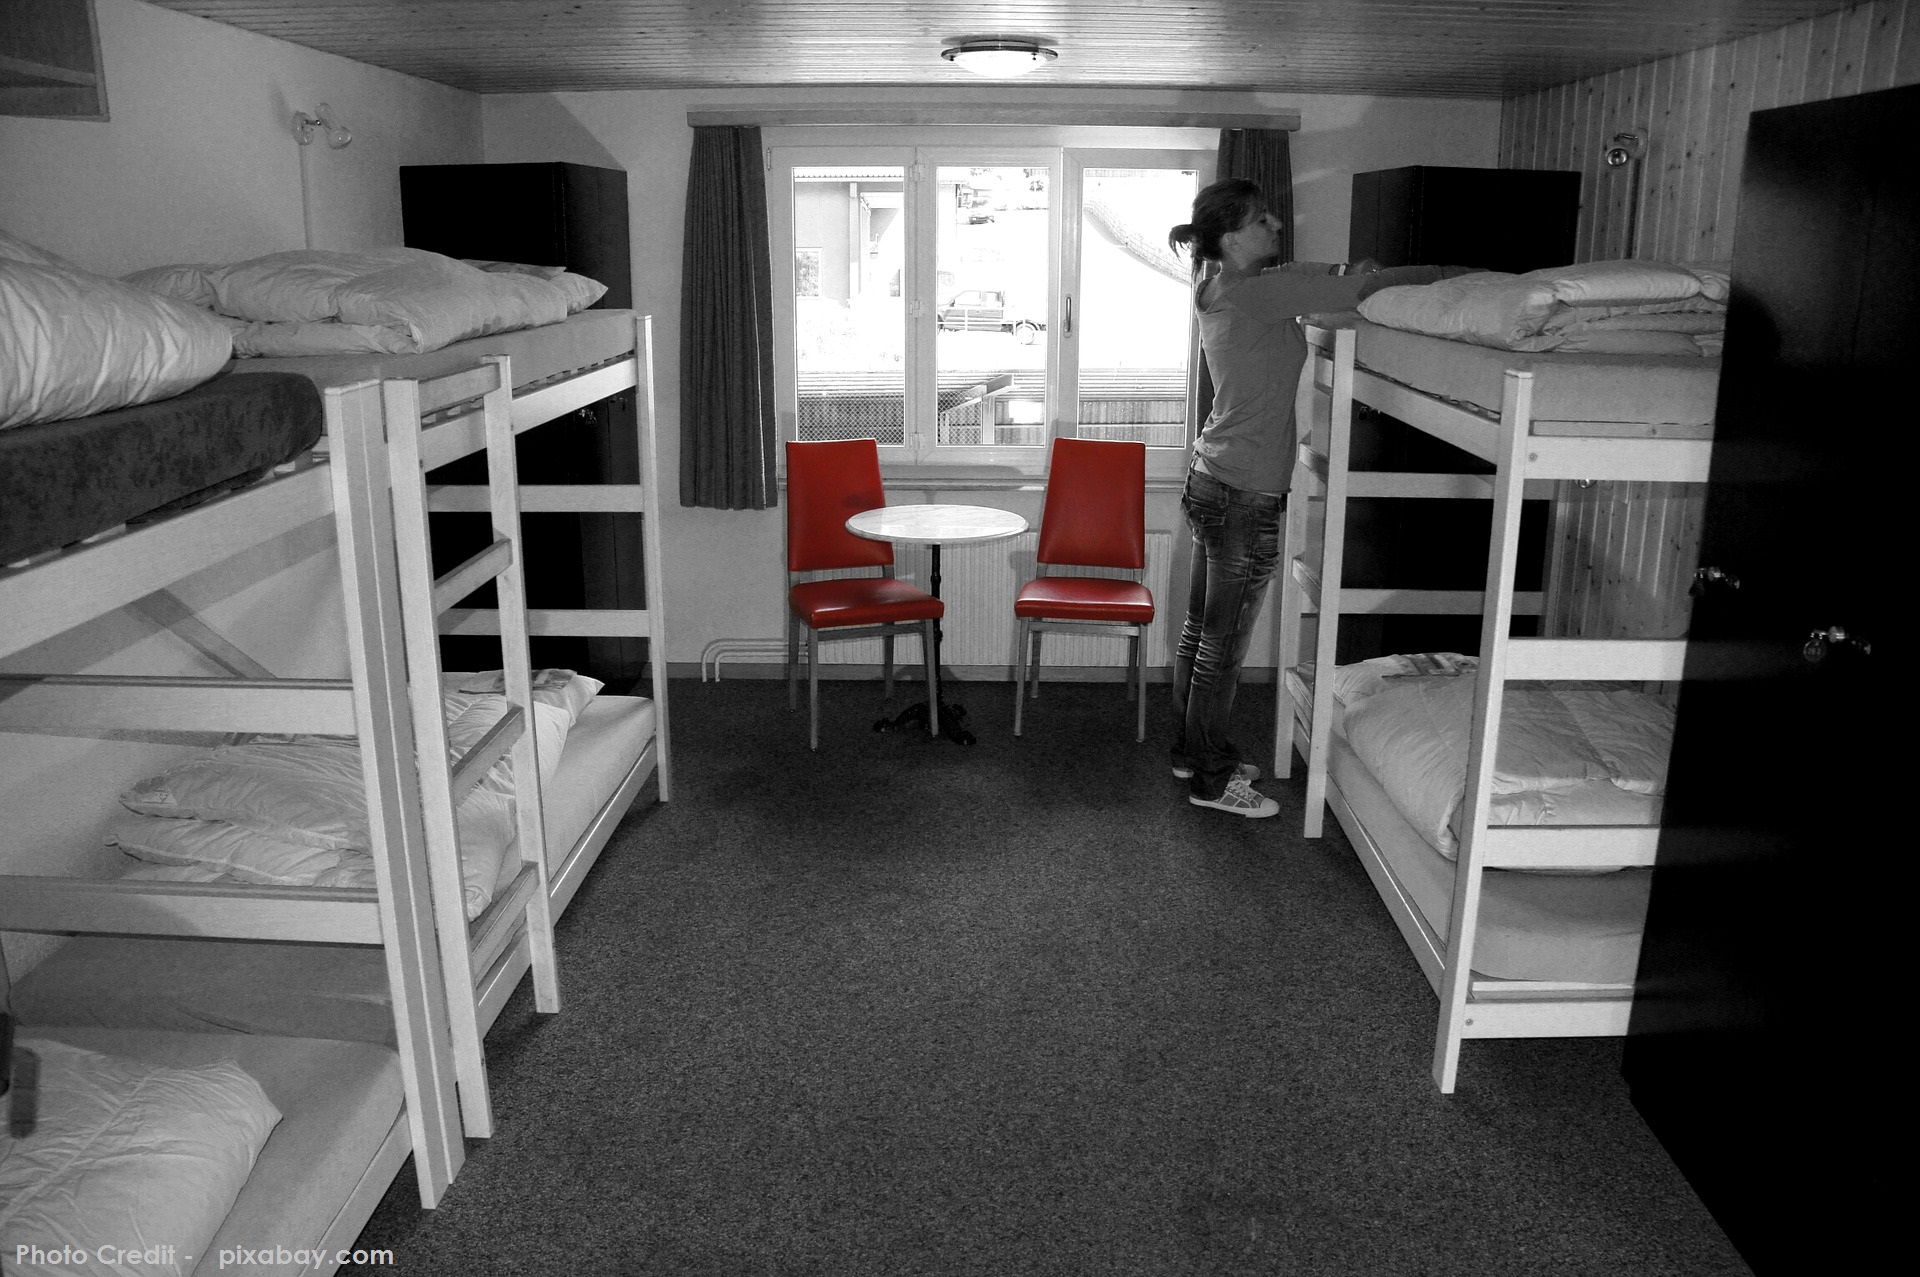 One of the Girls' Hostel Rooms.